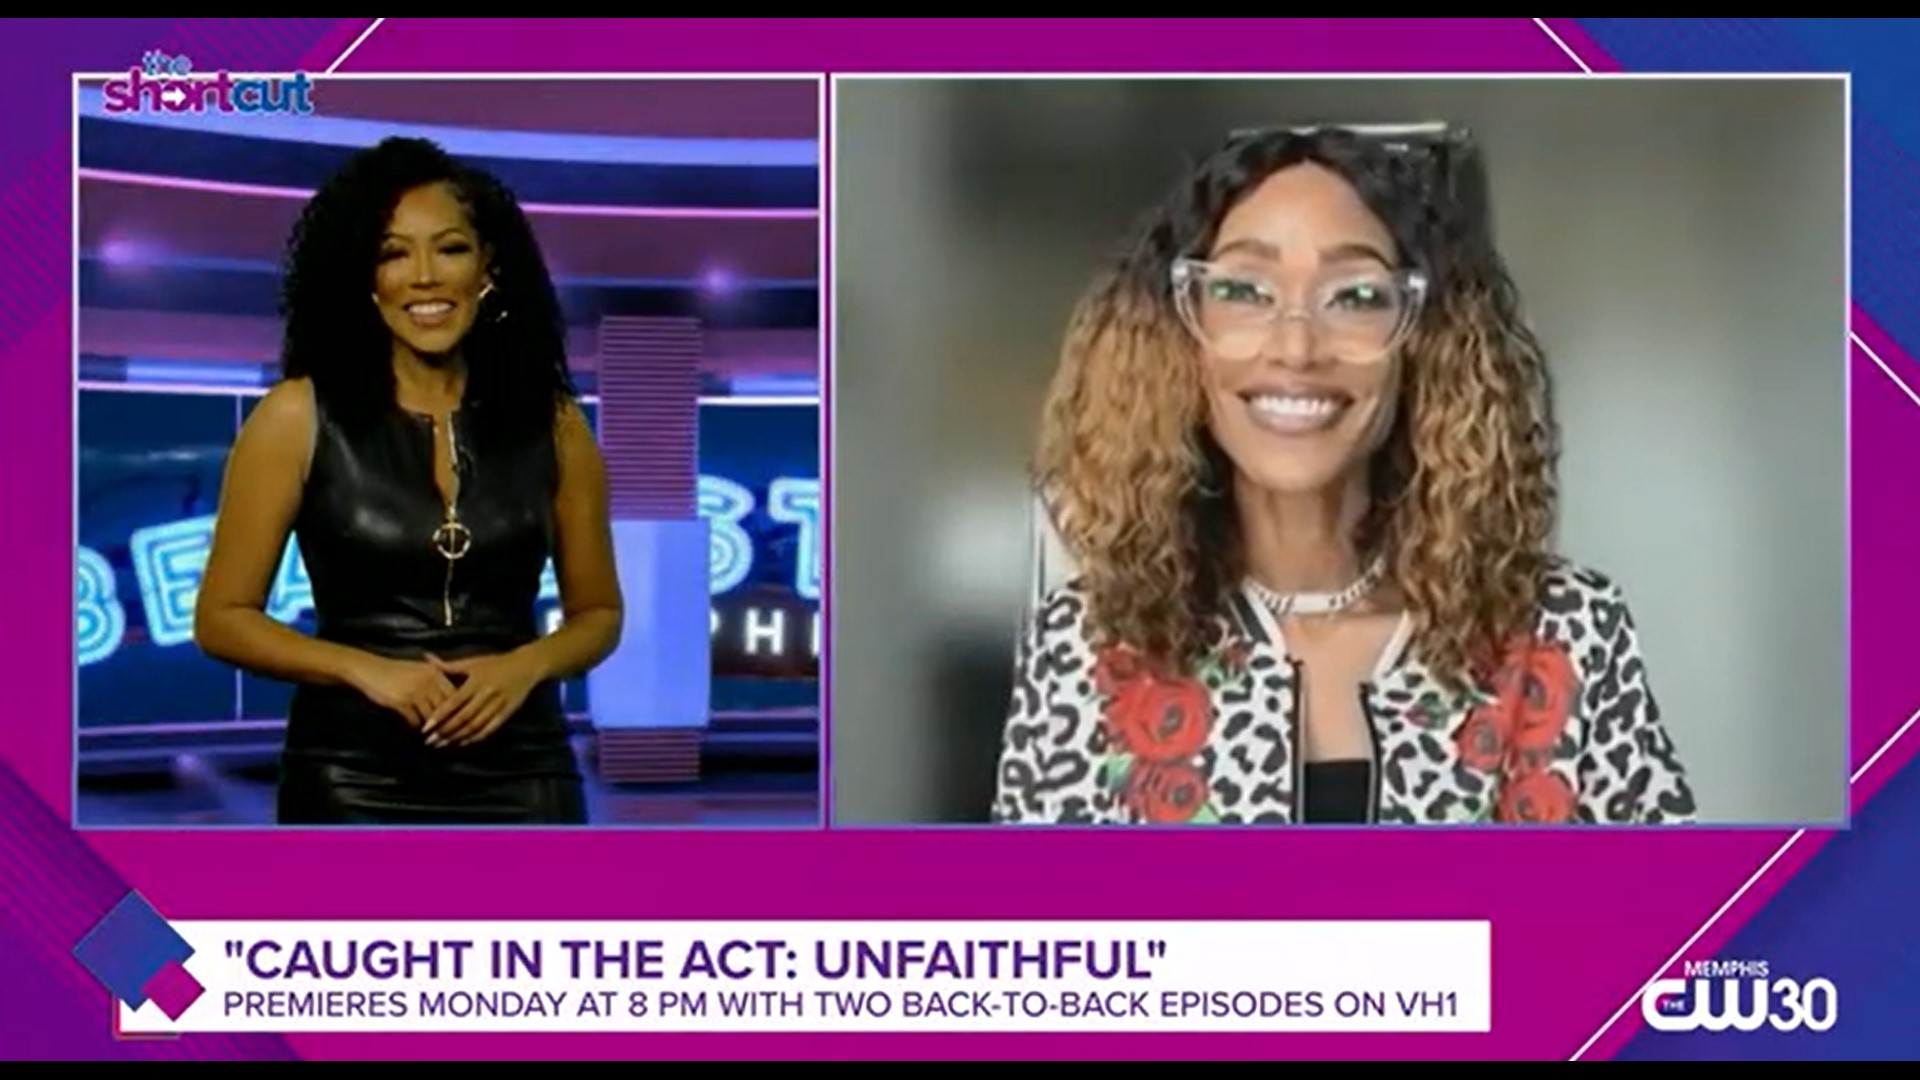 If juicy mystery drama shows sounds up your alley, then get a look at VH1's "Caught in the Act: Unfaithful" here on "The Shortcut!" Featuring host Tami Roman!